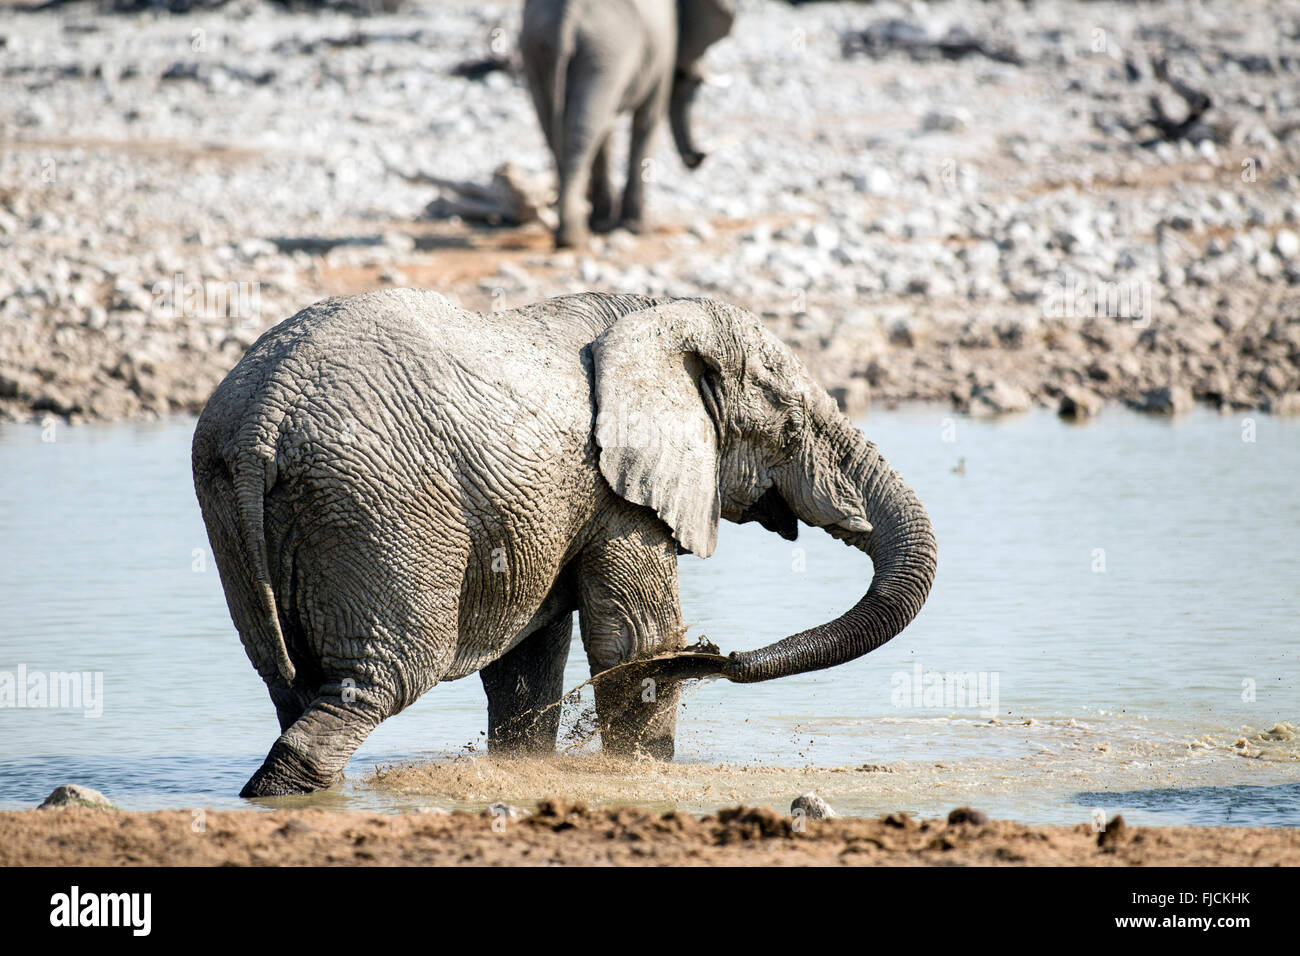 Elephant at a water hole in Namibia. Stock Photo